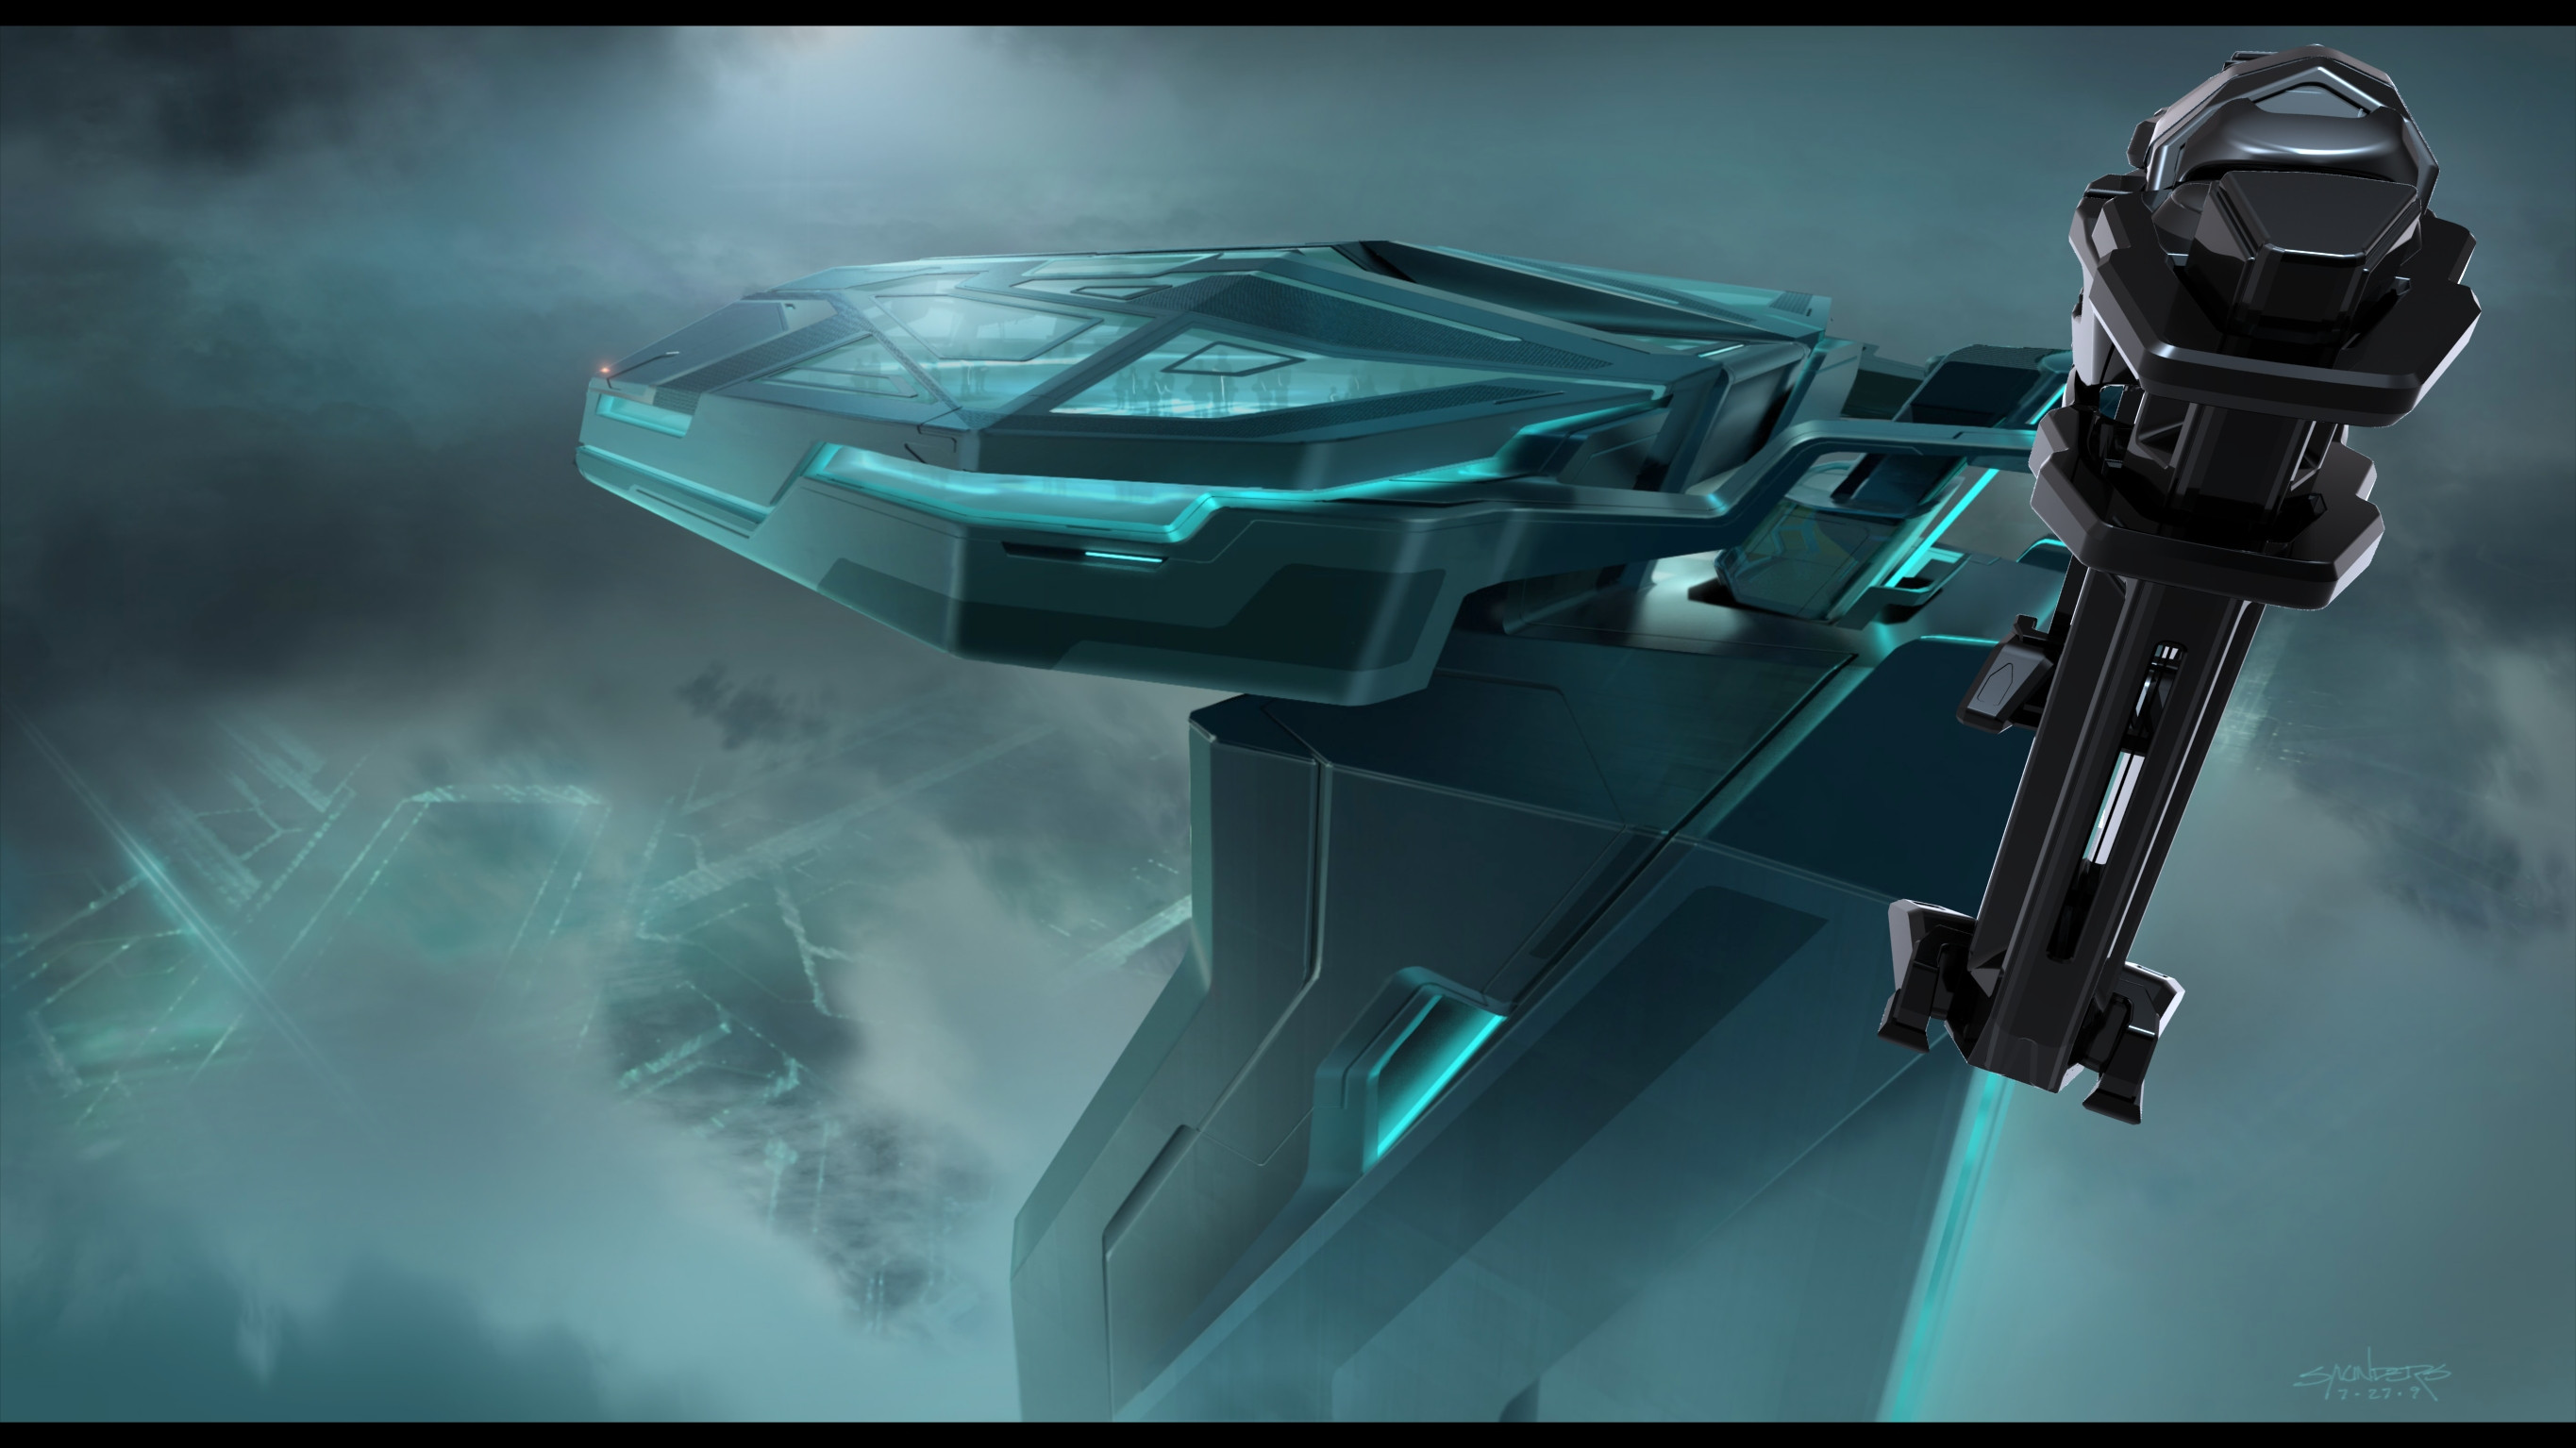 Keyframe of Clu's Recognizer docked at the End of Line Club.